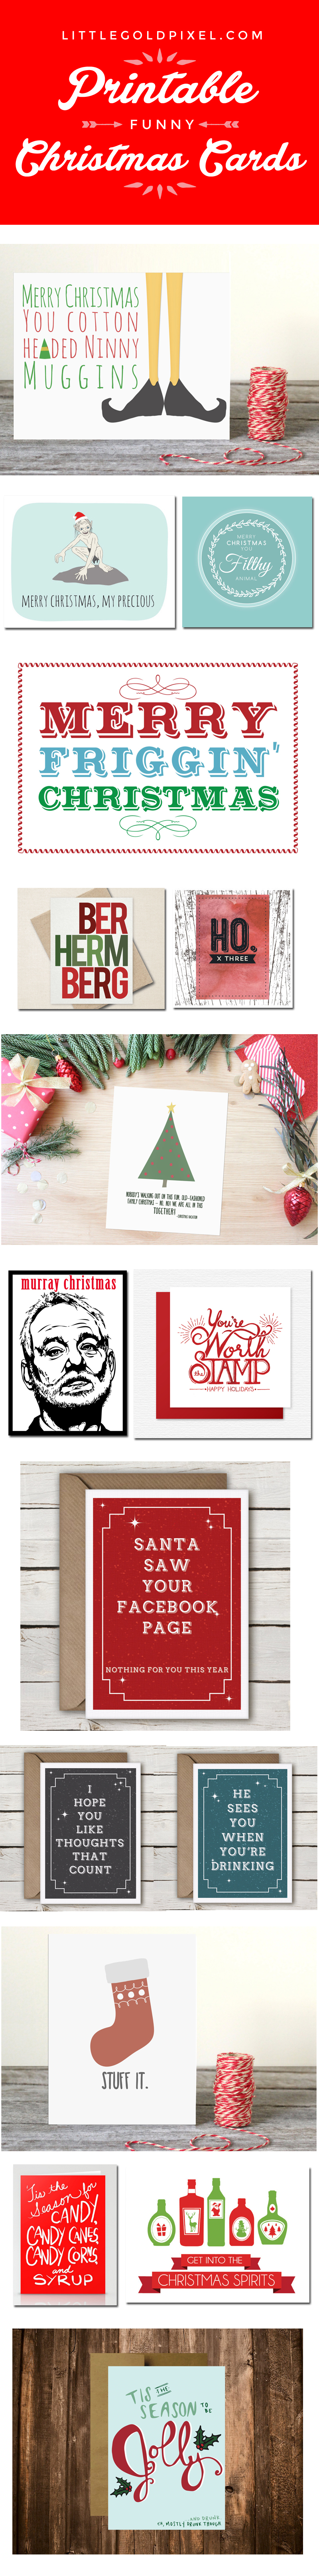 My Last-Minute Christmas Card Solution • littlegoldpixel.com • Funny, cute printable cards from Etsy designers